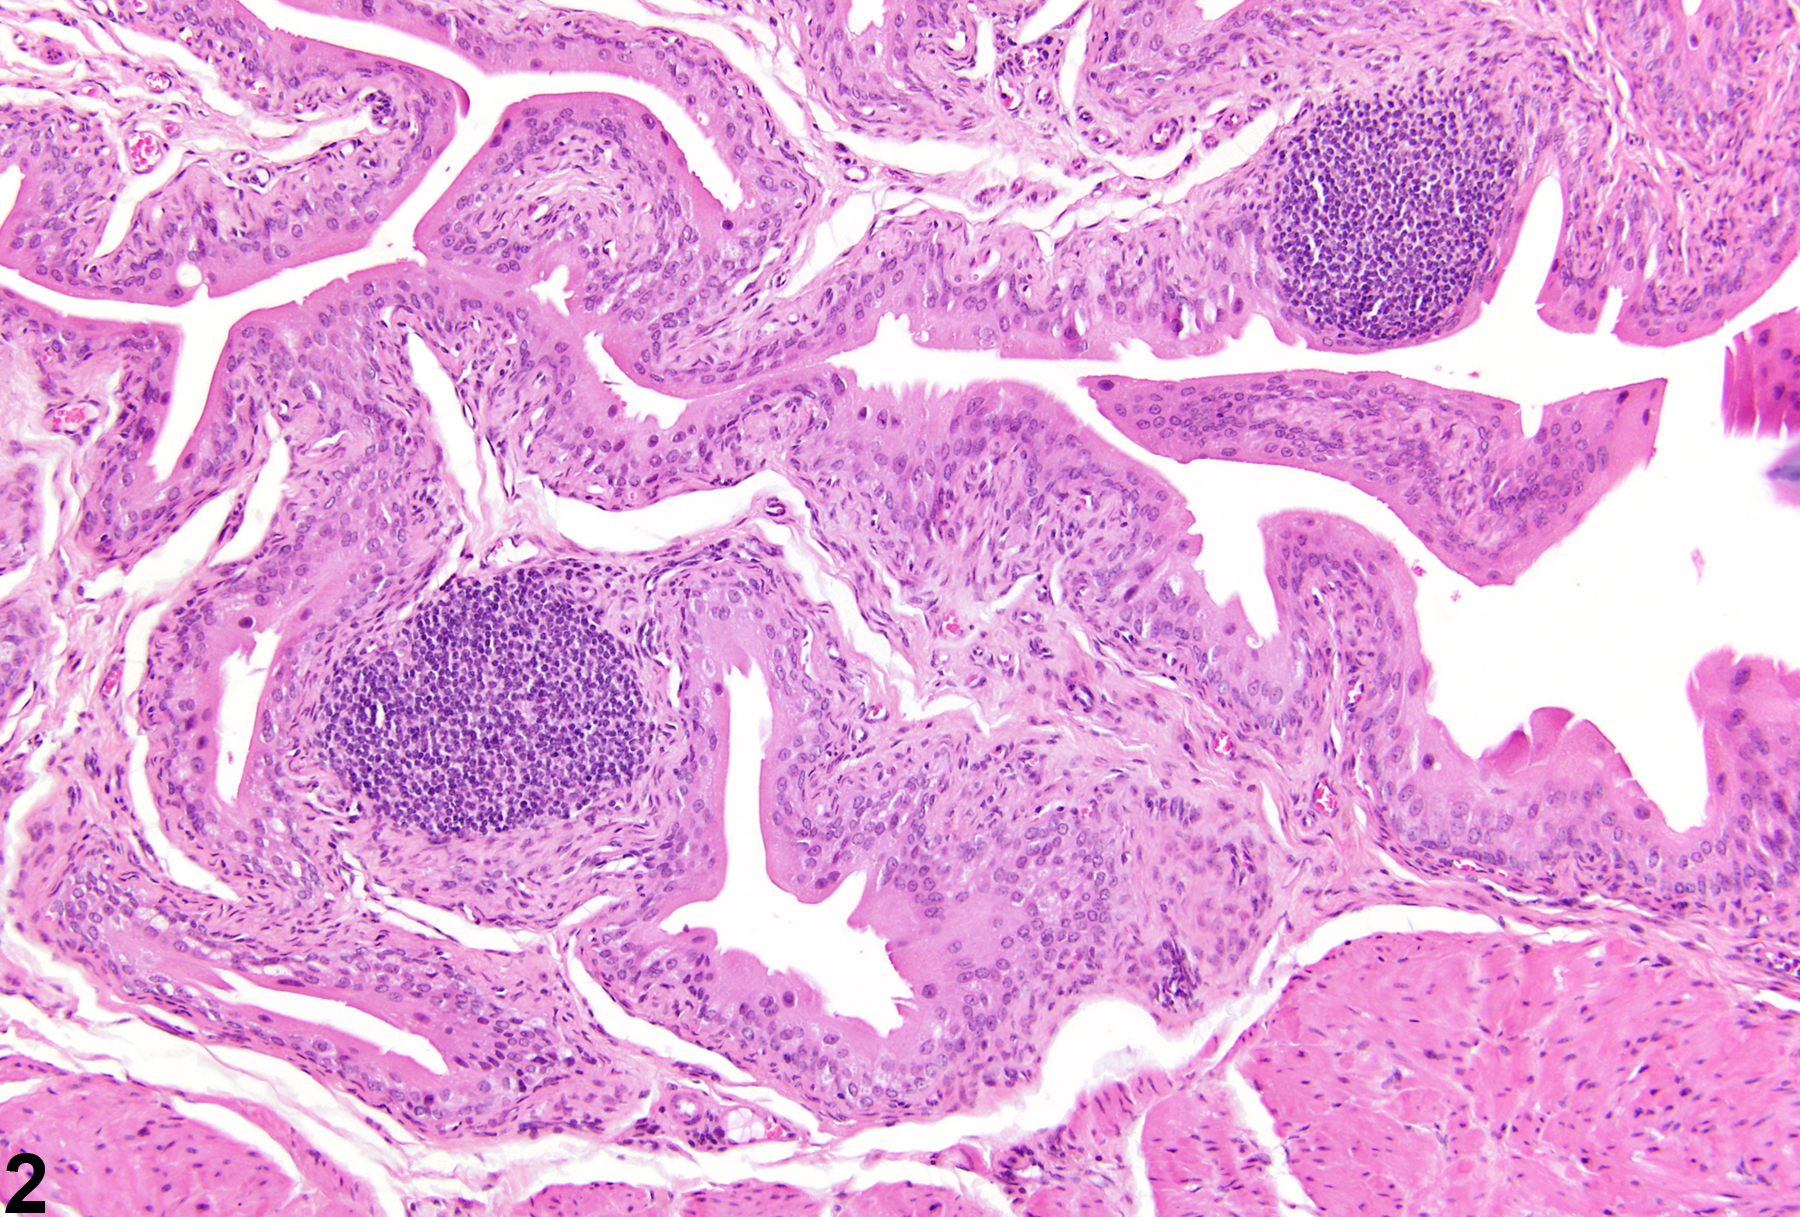 Image of infiltrative cellular, lymphocyte in the urinary bladder from a female B6C3F1 mouse in a chronic study